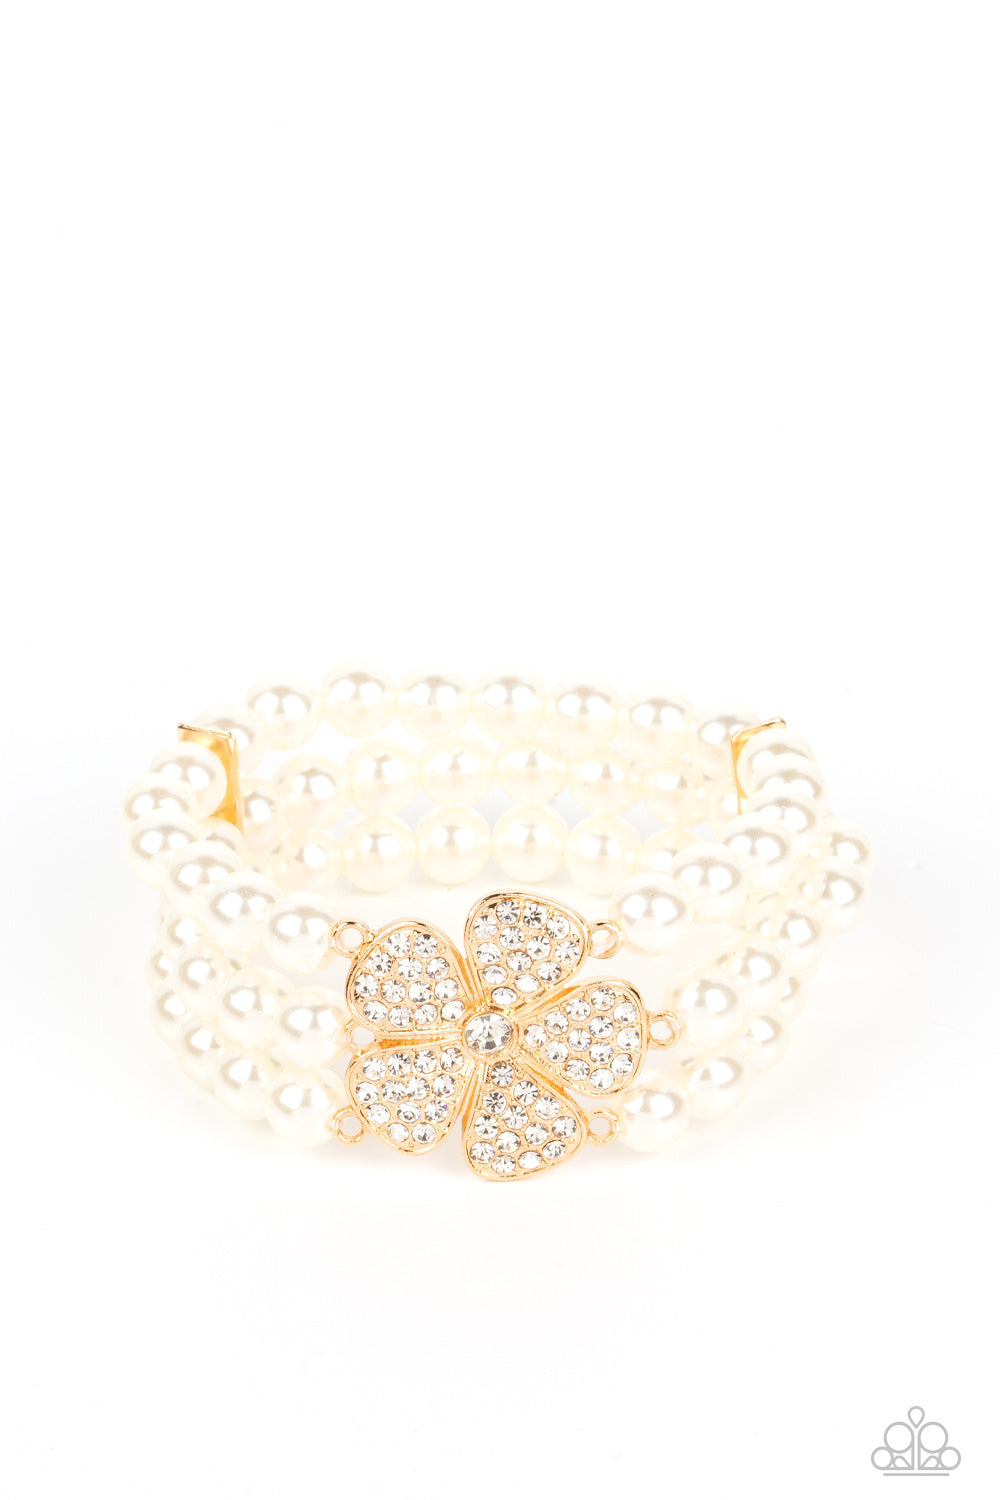 Park Avenue Orchard - Gold and White Pearl Flower Bracelet - Paparazzi Jewelry - Bejeweled Accessories By Kristie - Separated by dainty gold plates, classic white pearls are threaded along three stretchy bands around the wrist. Encrusted in glassy white rhinestones, a glitzy gold flower blooms at the center of the wrist for a fierce floral statement. Sold as one individual bracelet.